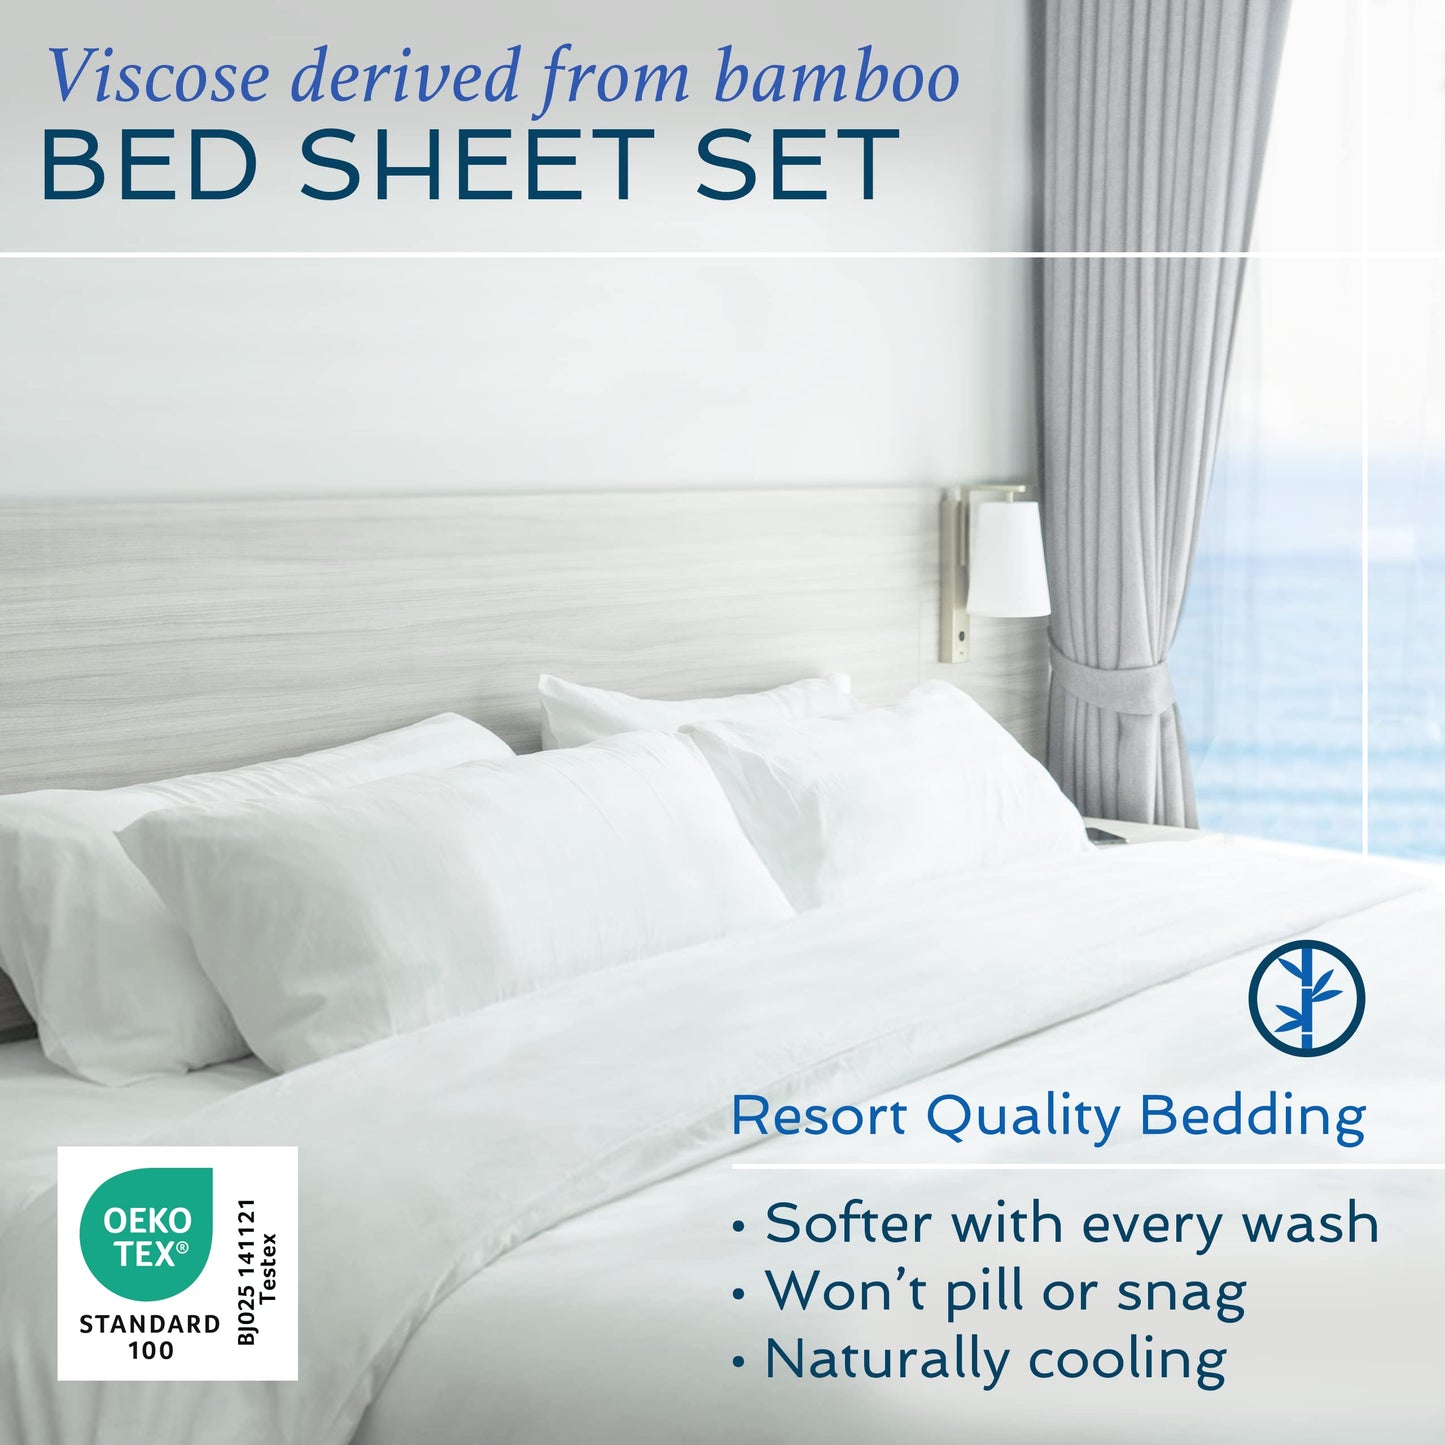 Hotel Sheets Direct 100% Viscose Derived from Bamboo Sheets Queen - Cooling Luxury Bed Sheets w Deep Pocket - Silky Soft - White